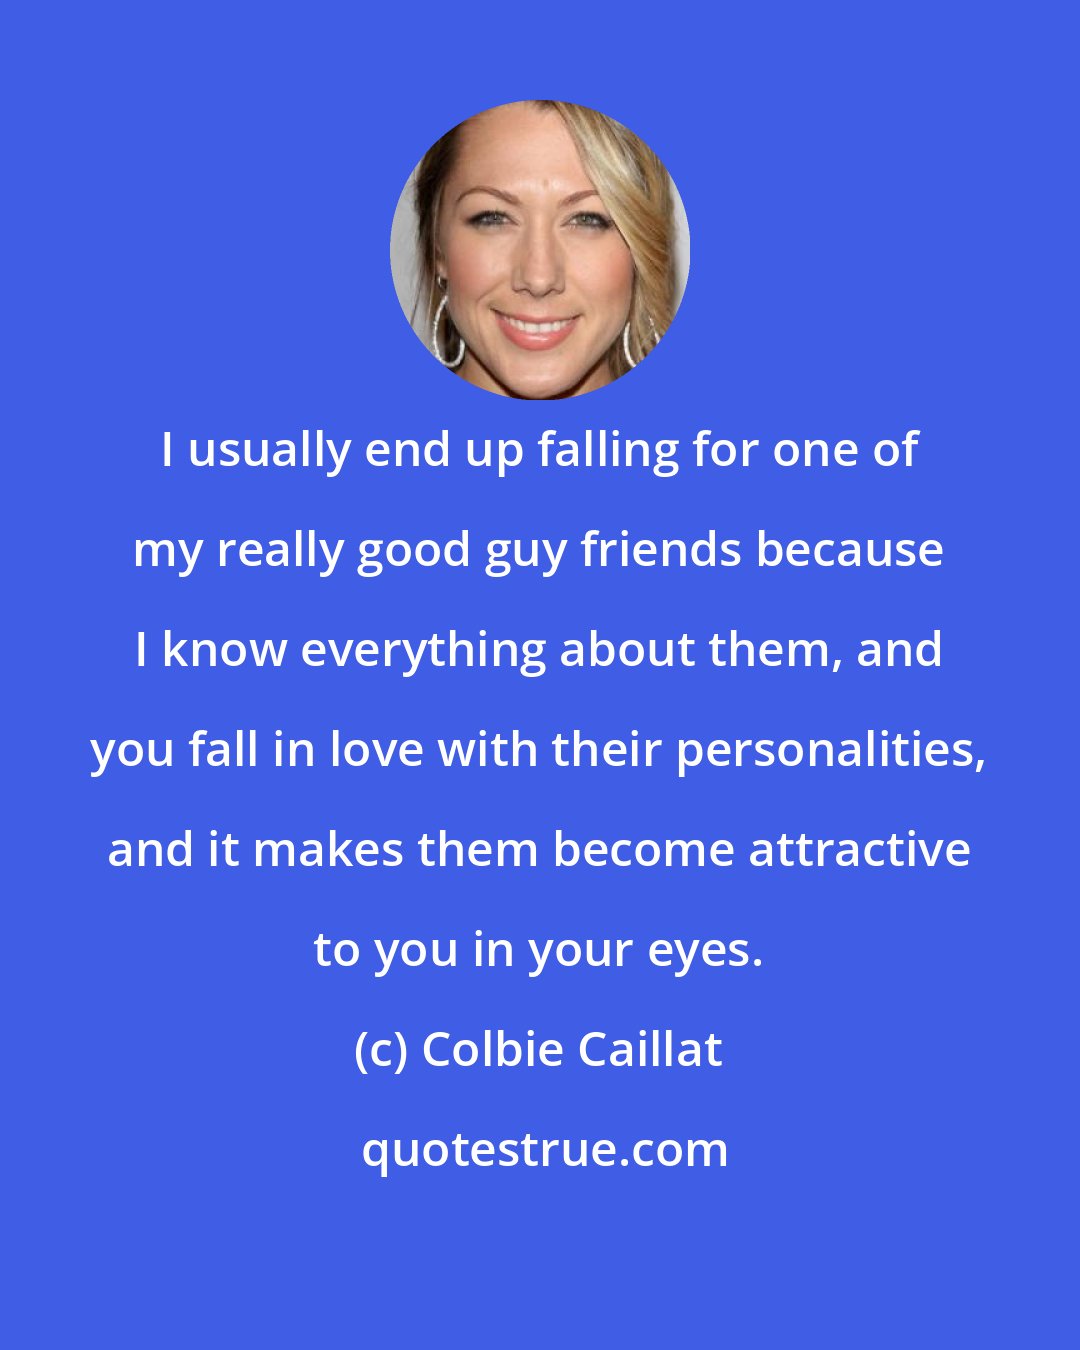 Colbie Caillat: I usually end up falling for one of my really good guy friends because I know everything about them, and you fall in love with their personalities, and it makes them become attractive to you in your eyes.